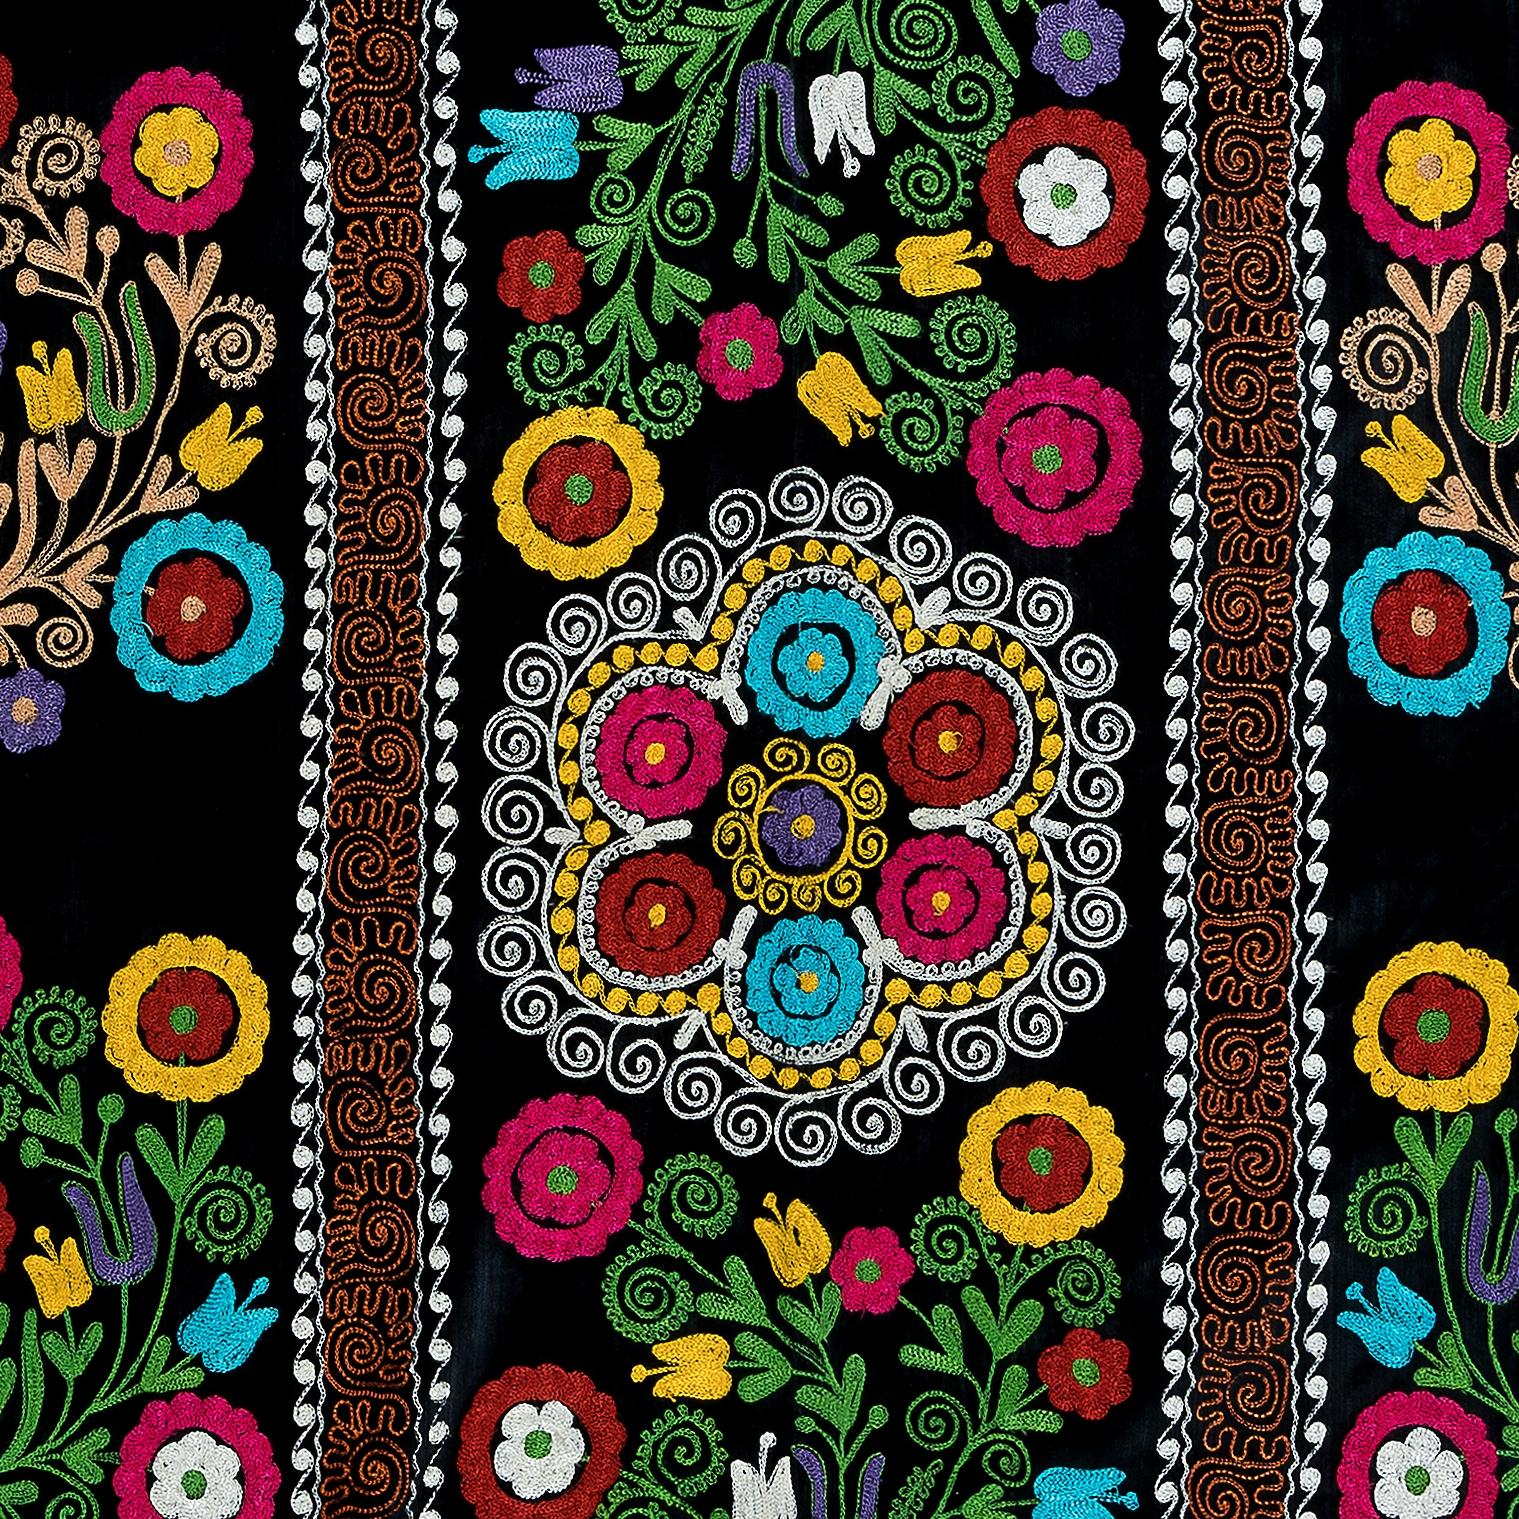 Uzbek 4.3x6.8 Ft Silk Embroidery Bed Cover, Black Wall Hanging, Vintage Suzani Throw For Sale